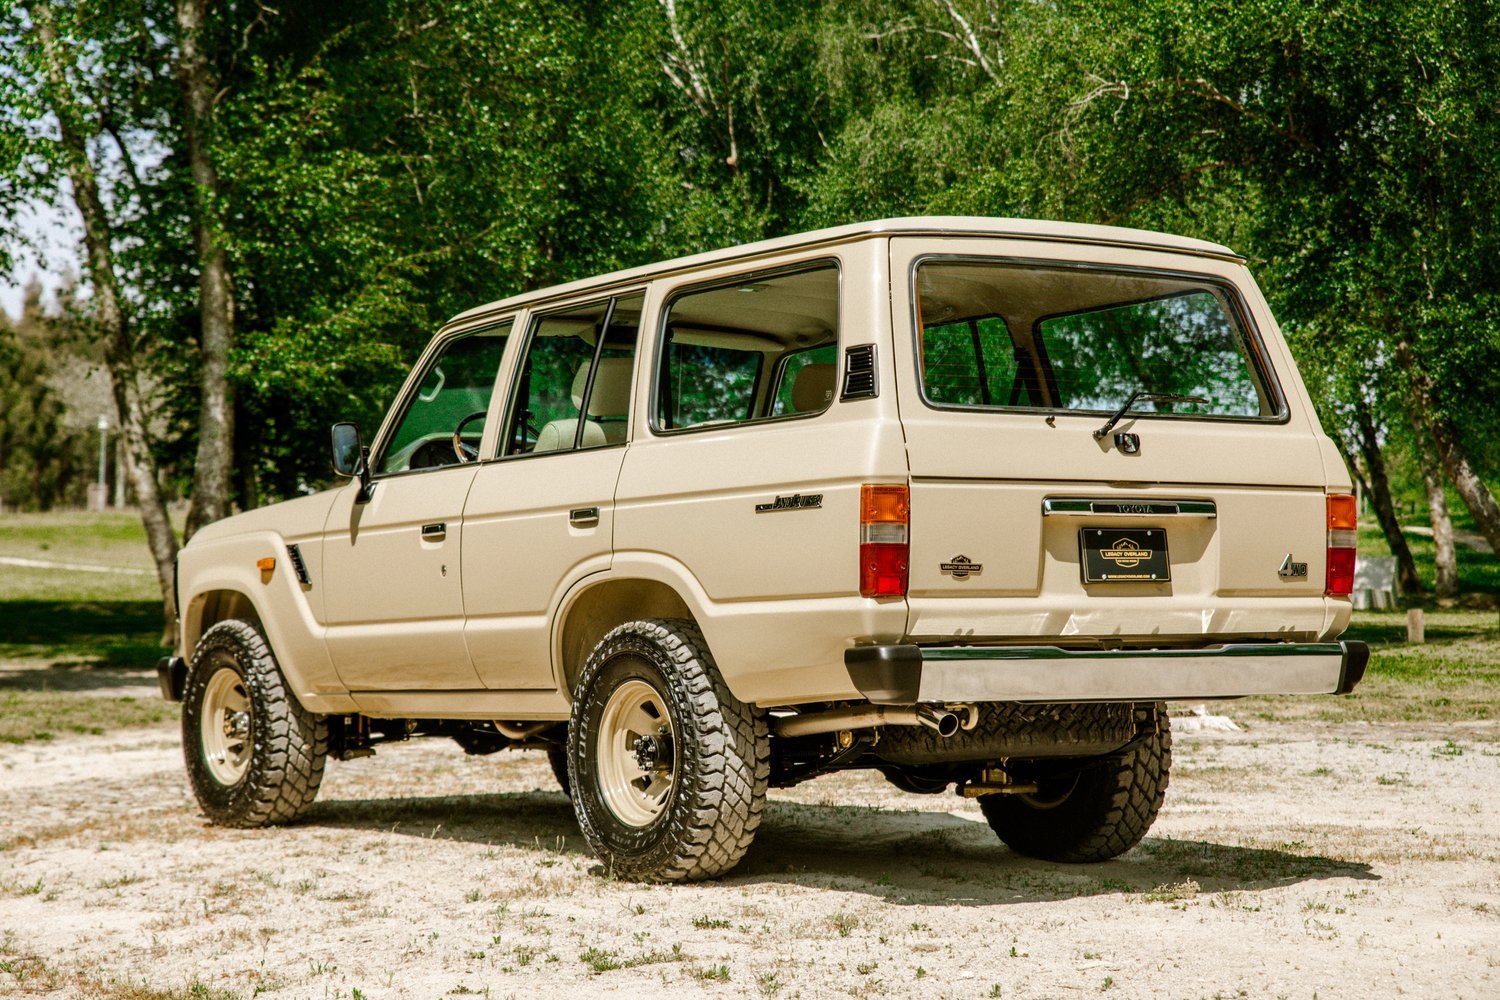 Take a look at our restored 1990 Toyota Land Cruiser FJ62, resplendent in the timeless hue of Dune Beige.

#toyota #landcruiser #fj62 #toyotalandcruiser #tlc #4x4 #fj60